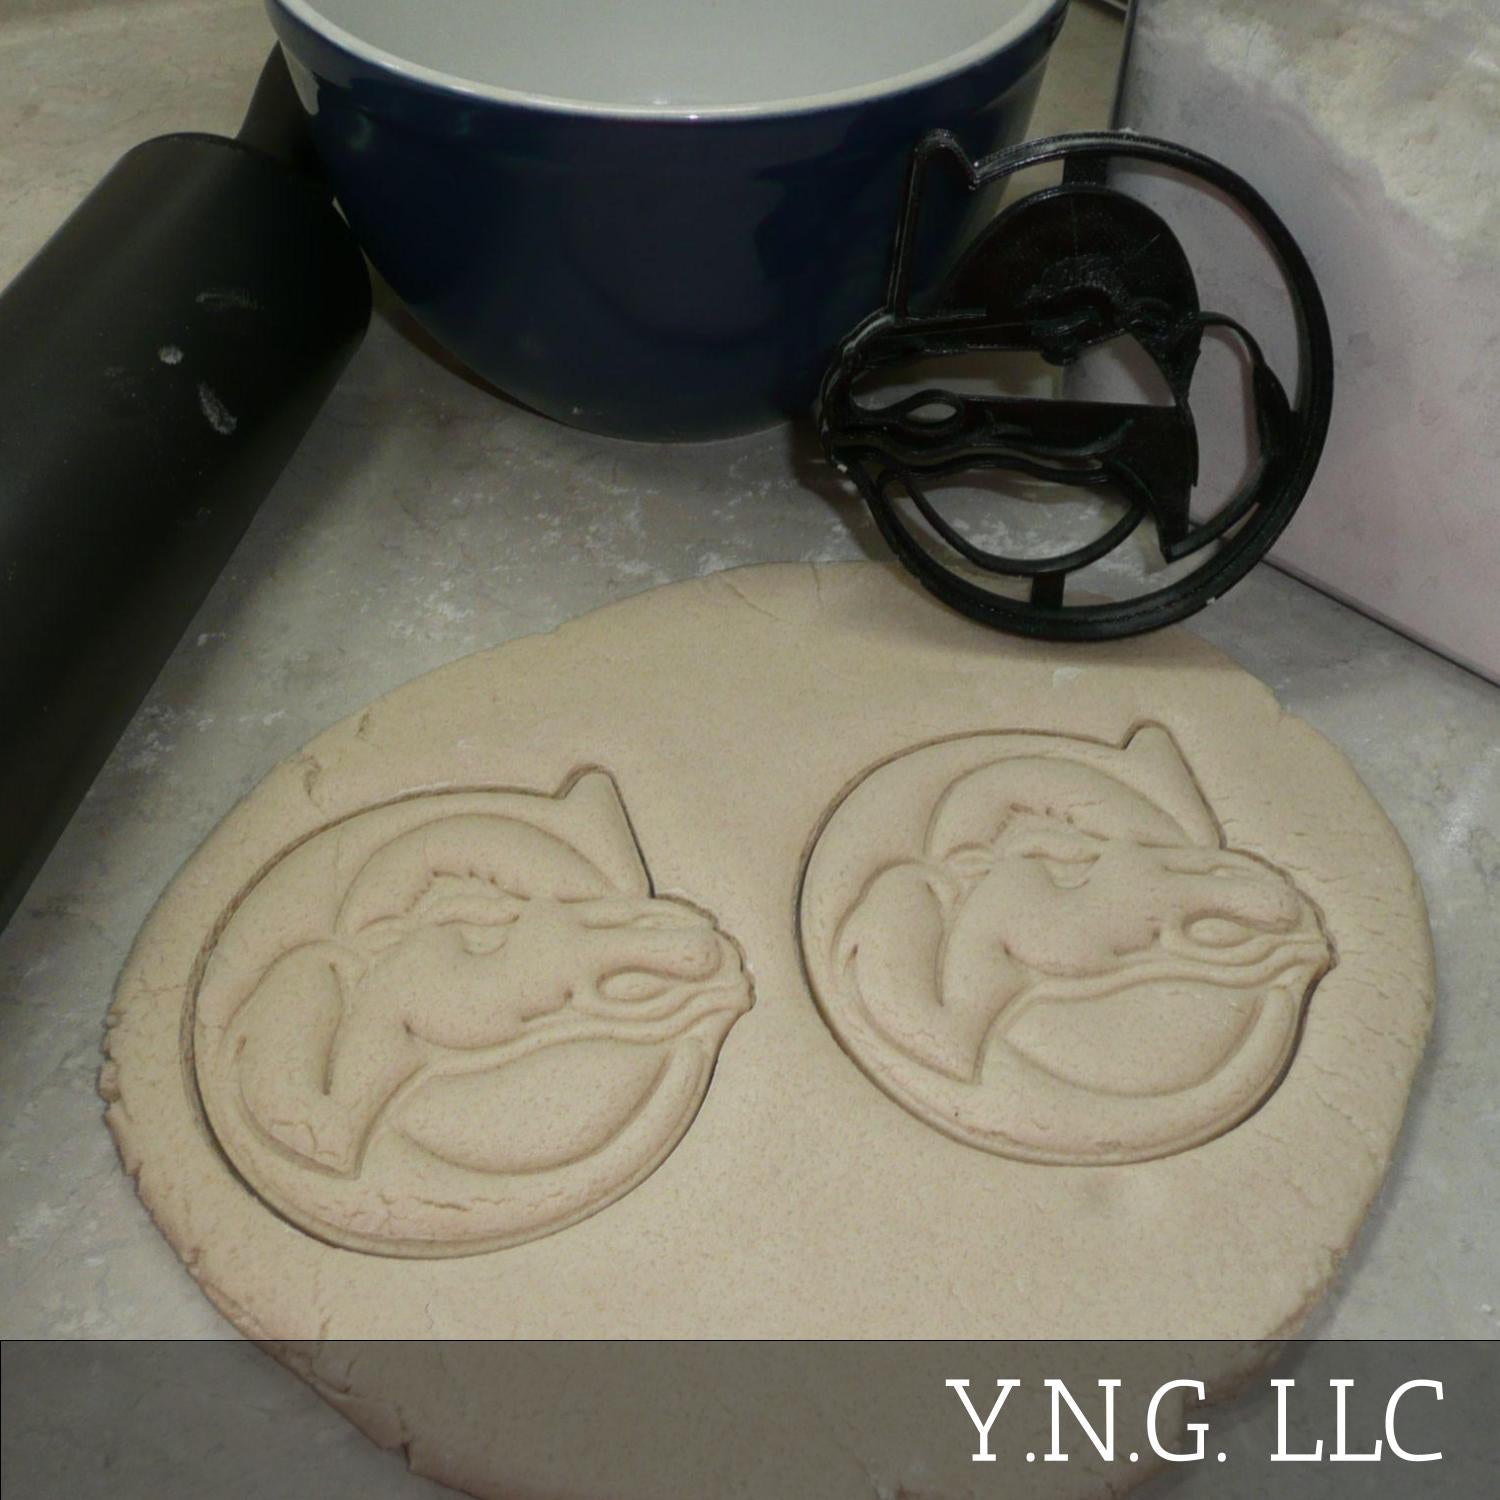 Dante Face Outline Dog Cartoon Character Coco Cookie Cutter USA PR3251